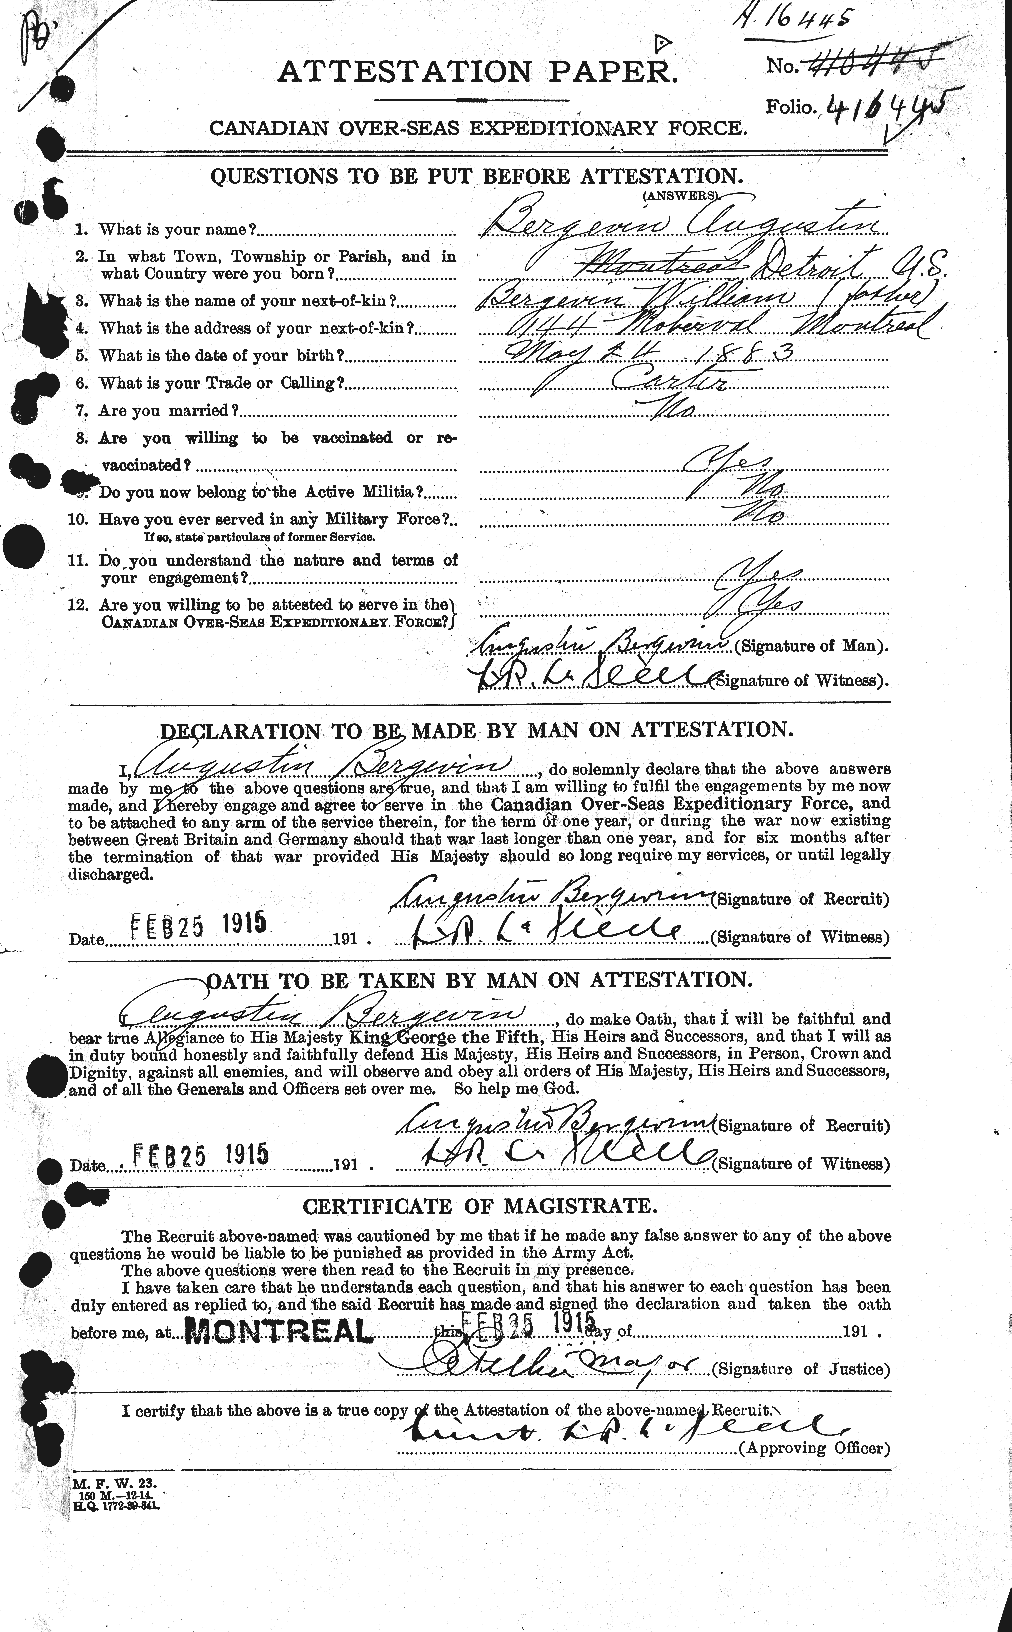 Personnel Records of the First World War - CEF 232904a